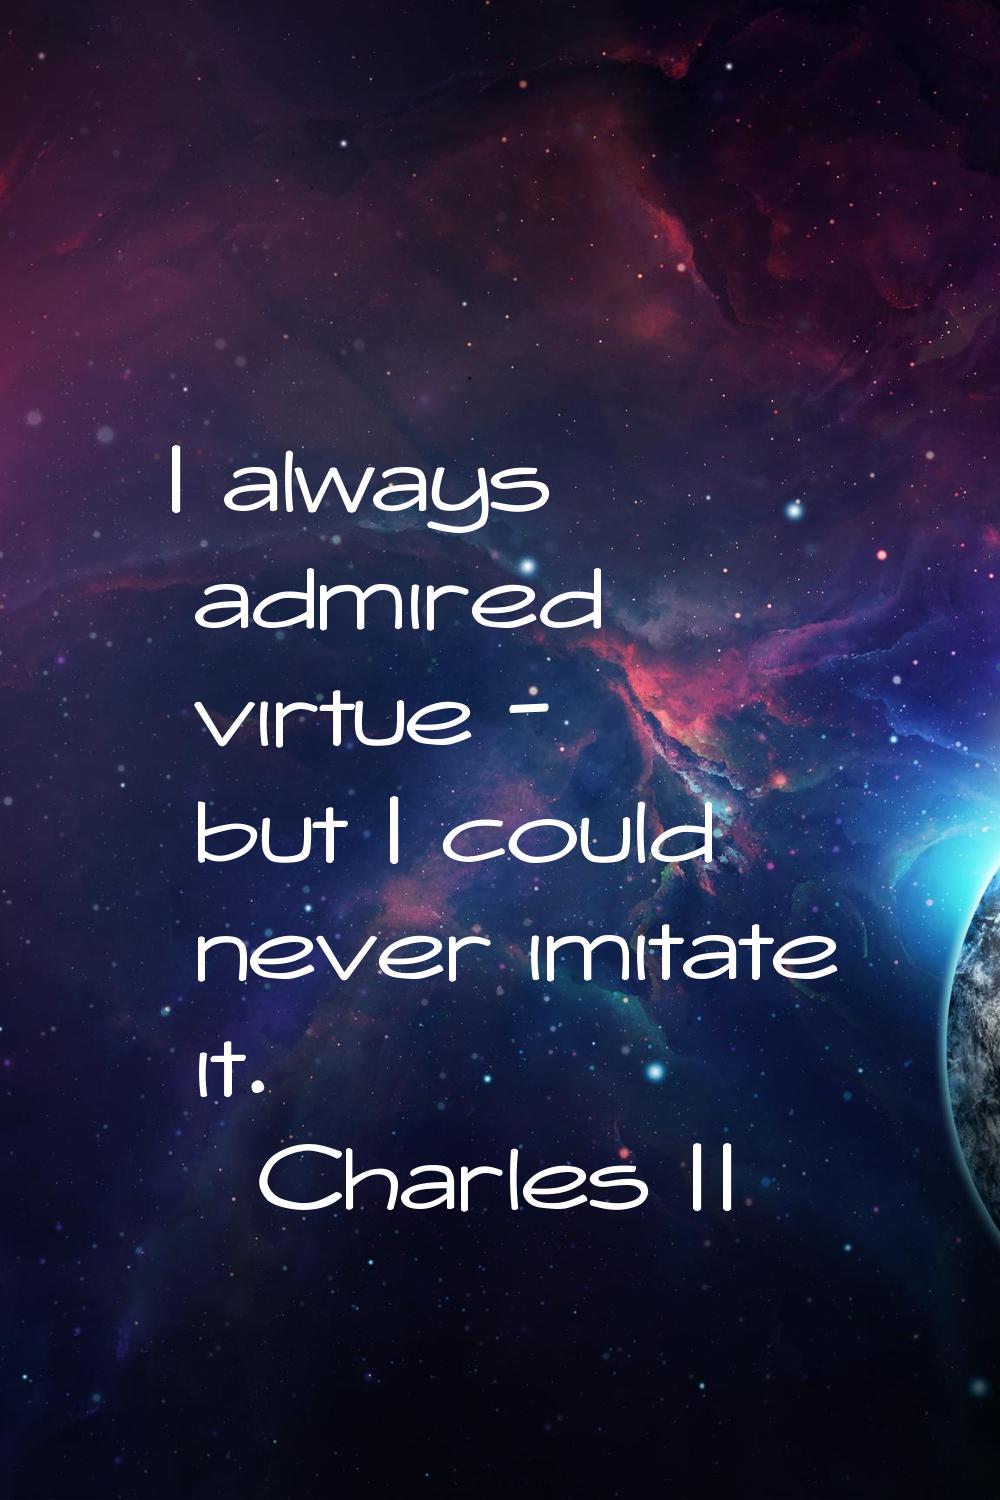 I always admired virtue - but I could never imitate it.